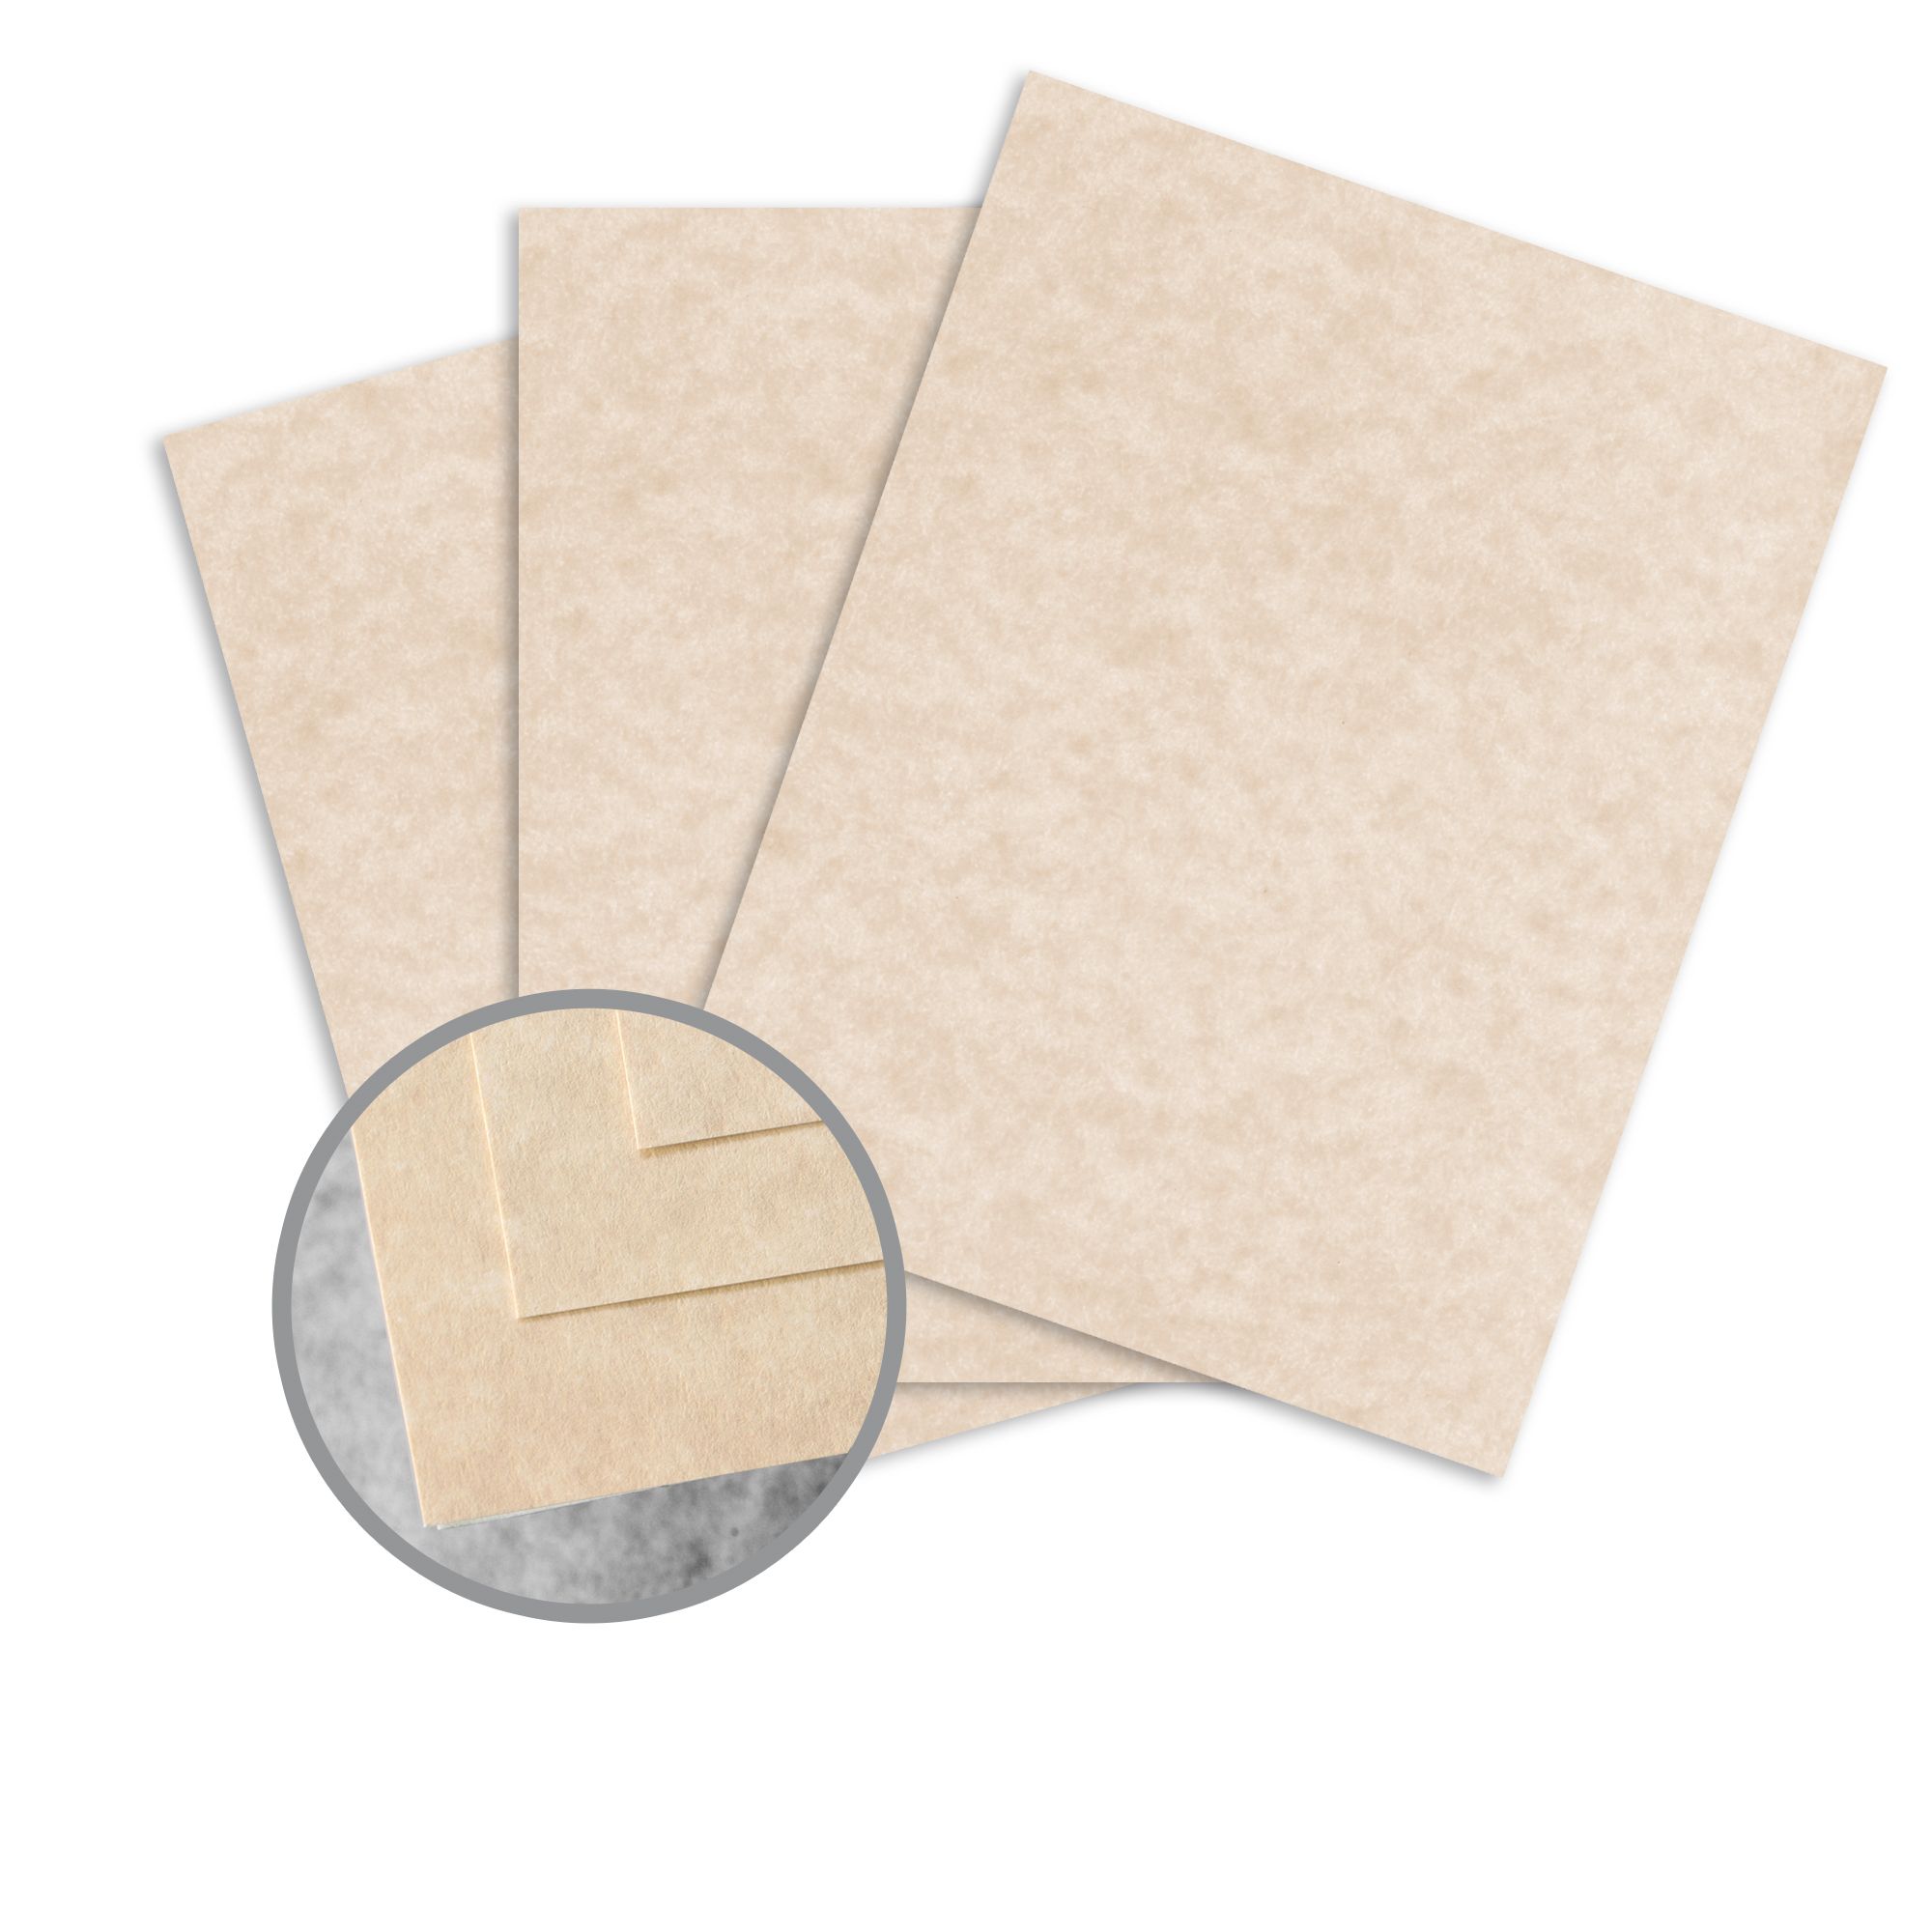 60 Text Vellum Parchment Paper No. 10, Aged Limited Papers Latter Papers and Matching Envelopes. 